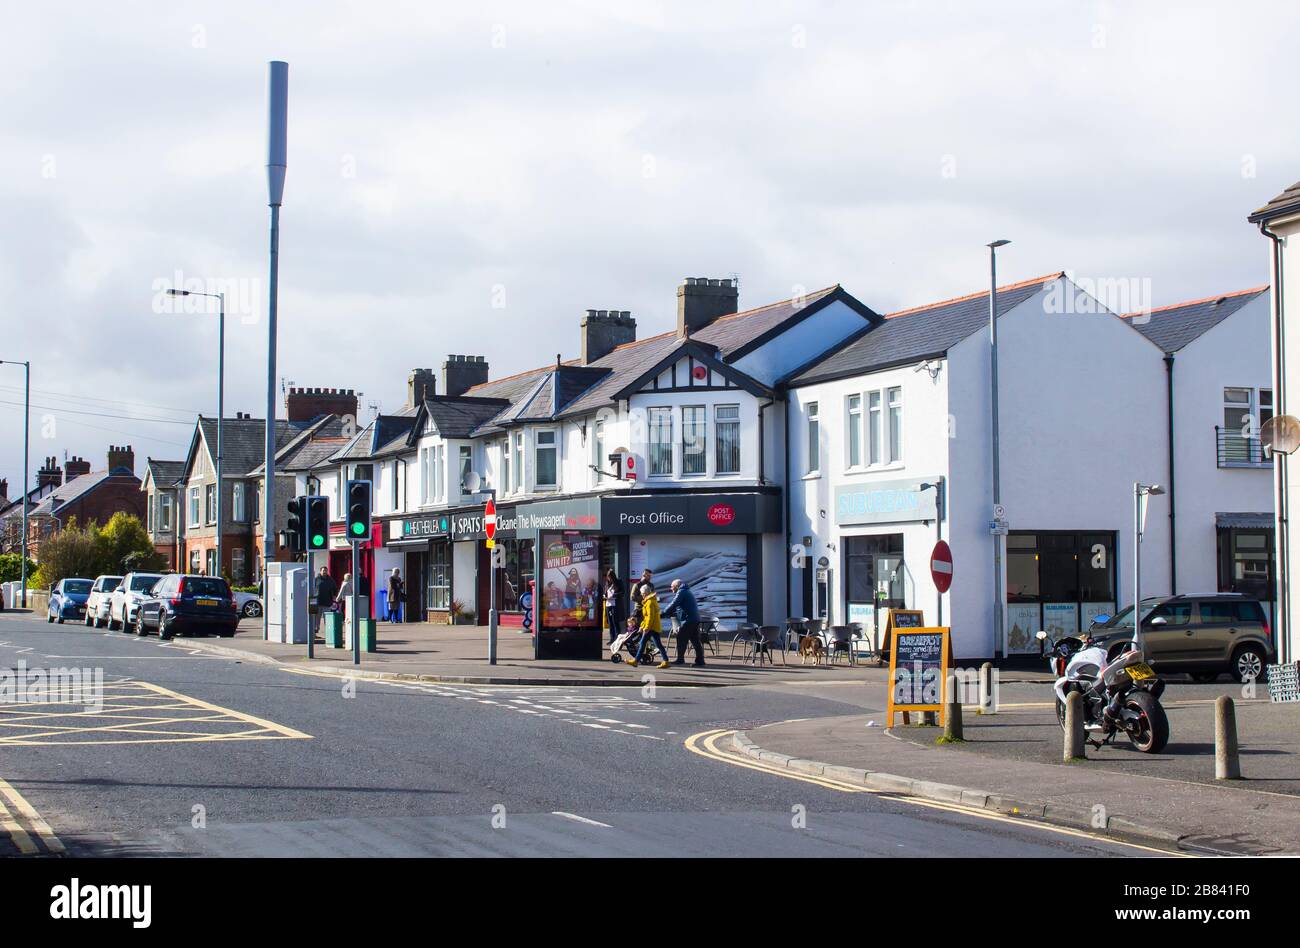 27 February 2020 Parked cars and pedestrians in the Ballyholme Village area on the Groomsport Road Bangor County Down Northern Ireland on a bright aft Stock Photo